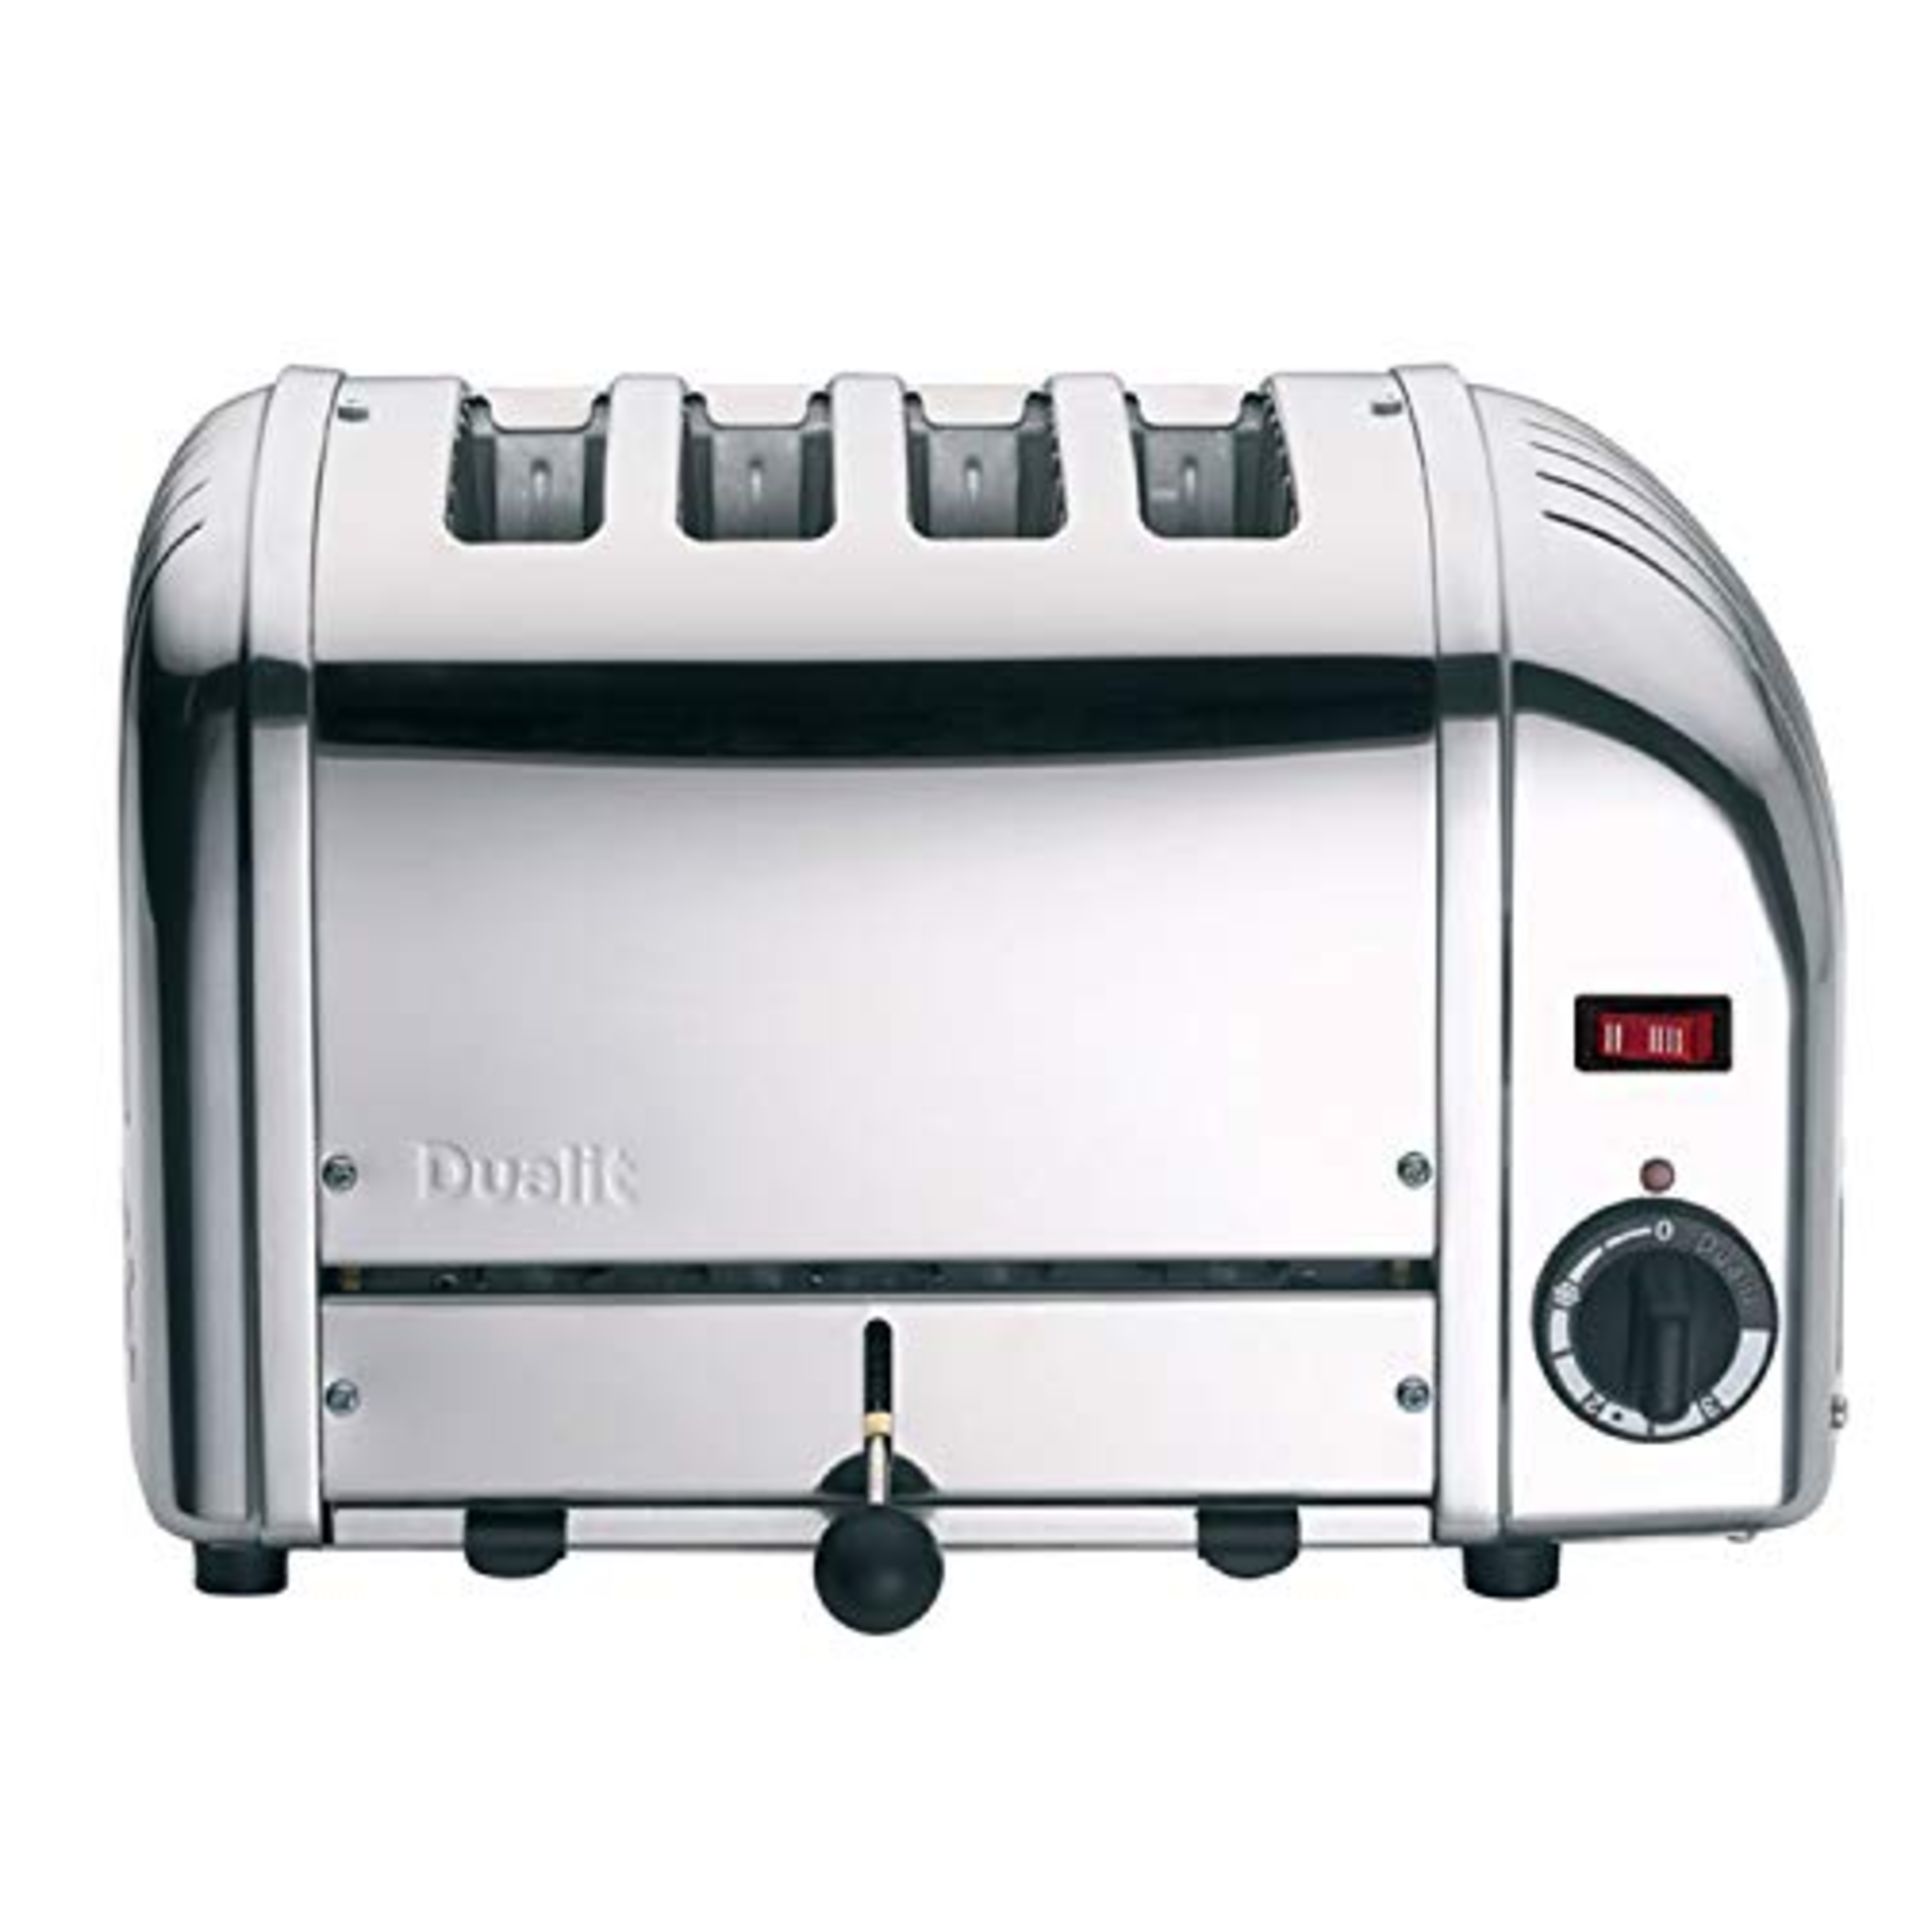 RRP £169.00 Dualit Classic 4 Slice Vario Toaster - Stainless steel, hand built in the UK - Replace